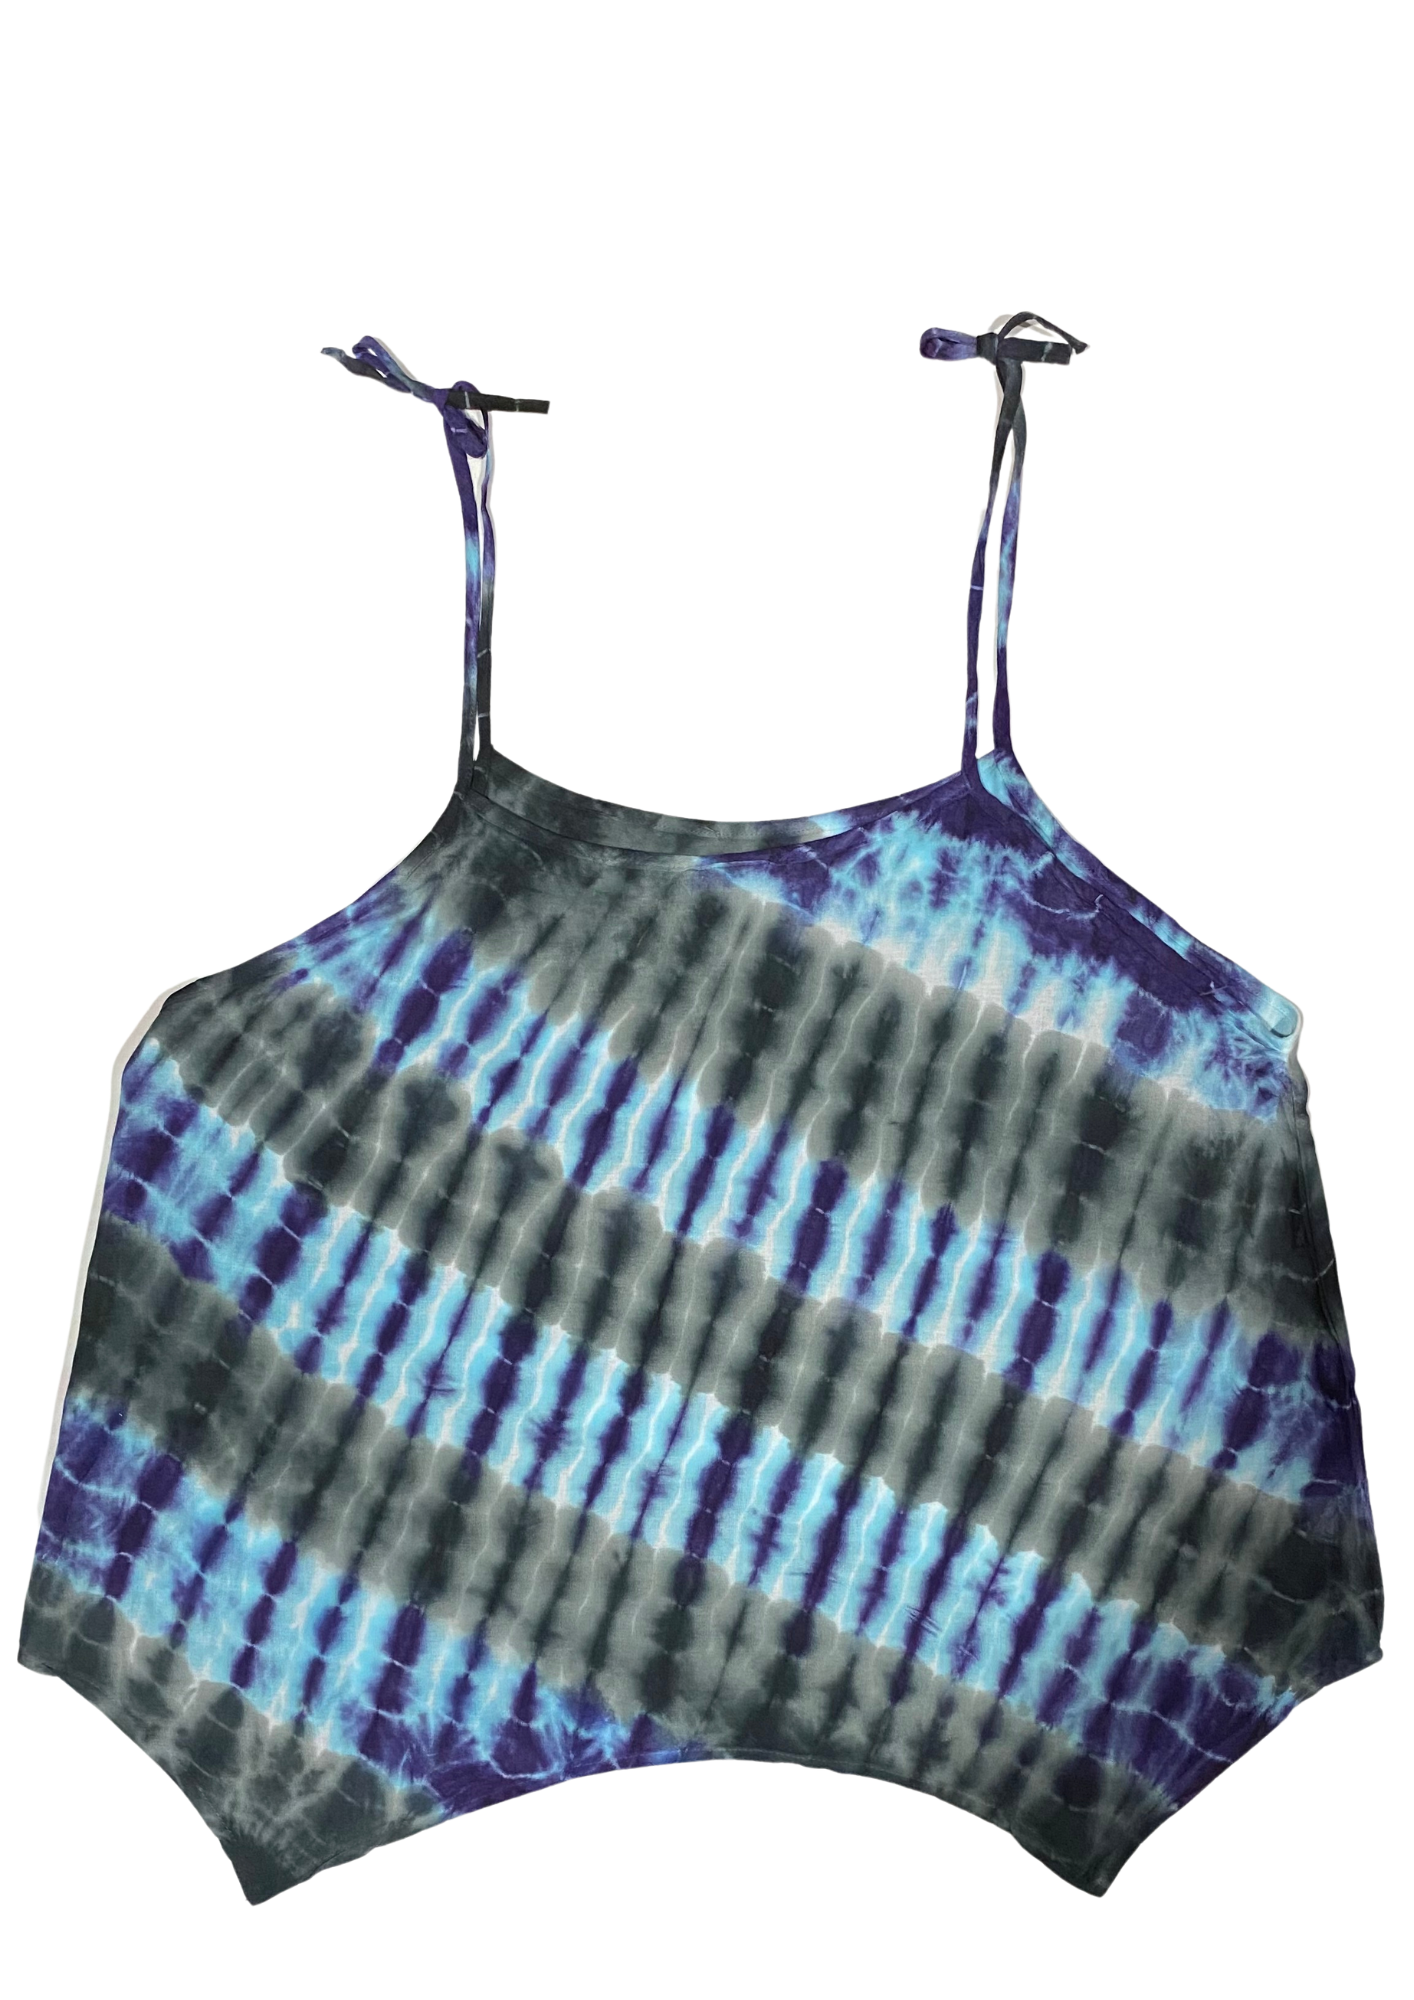 Cami Camisole Teen & Women, One Size Free Size Fit 0 to 8, Handmade Tie Dyed - Purple Wave